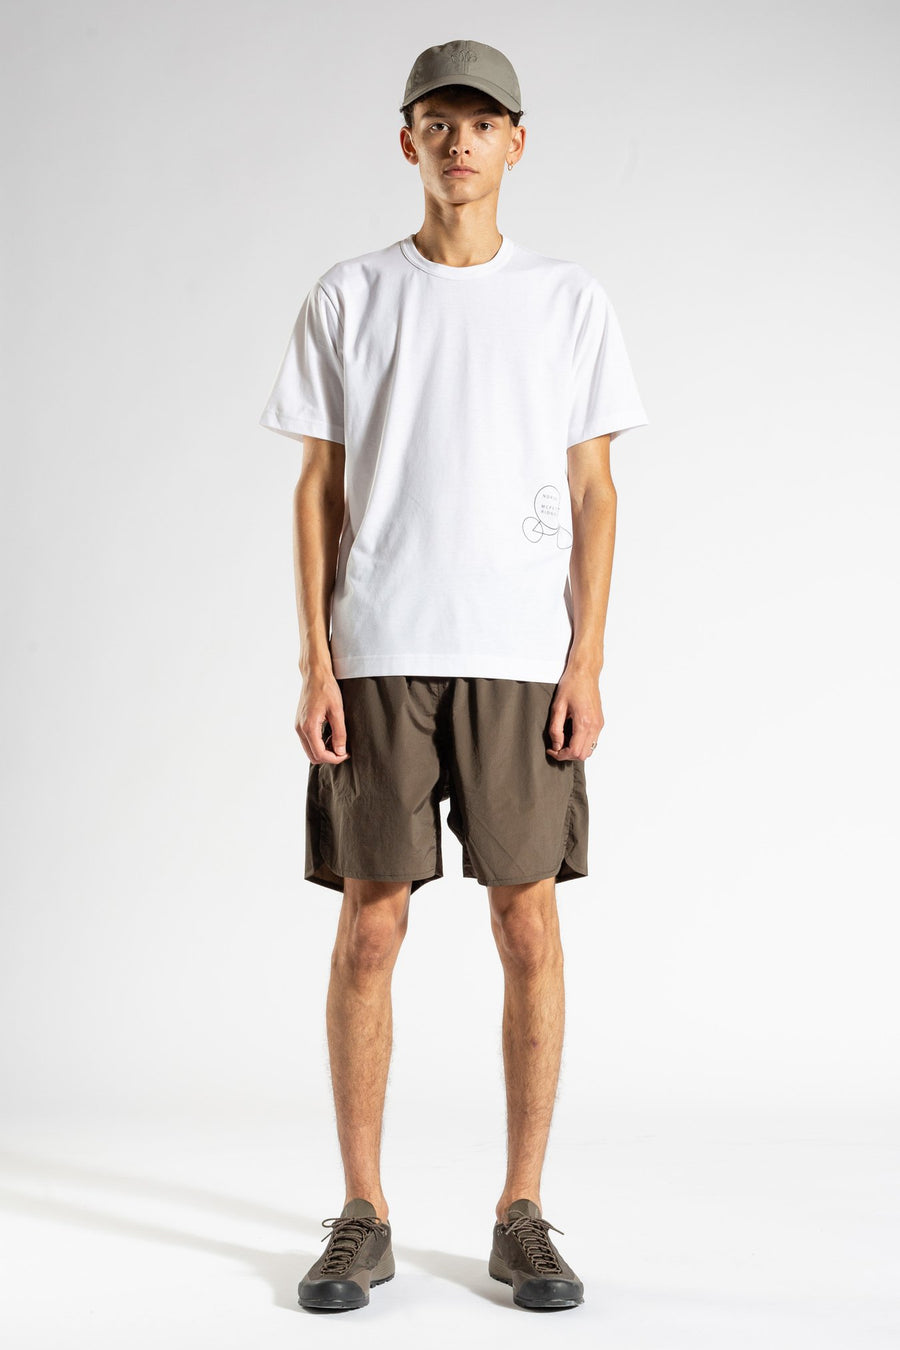 Norse Projects x Geoff McFetridge Tech Short Taupe